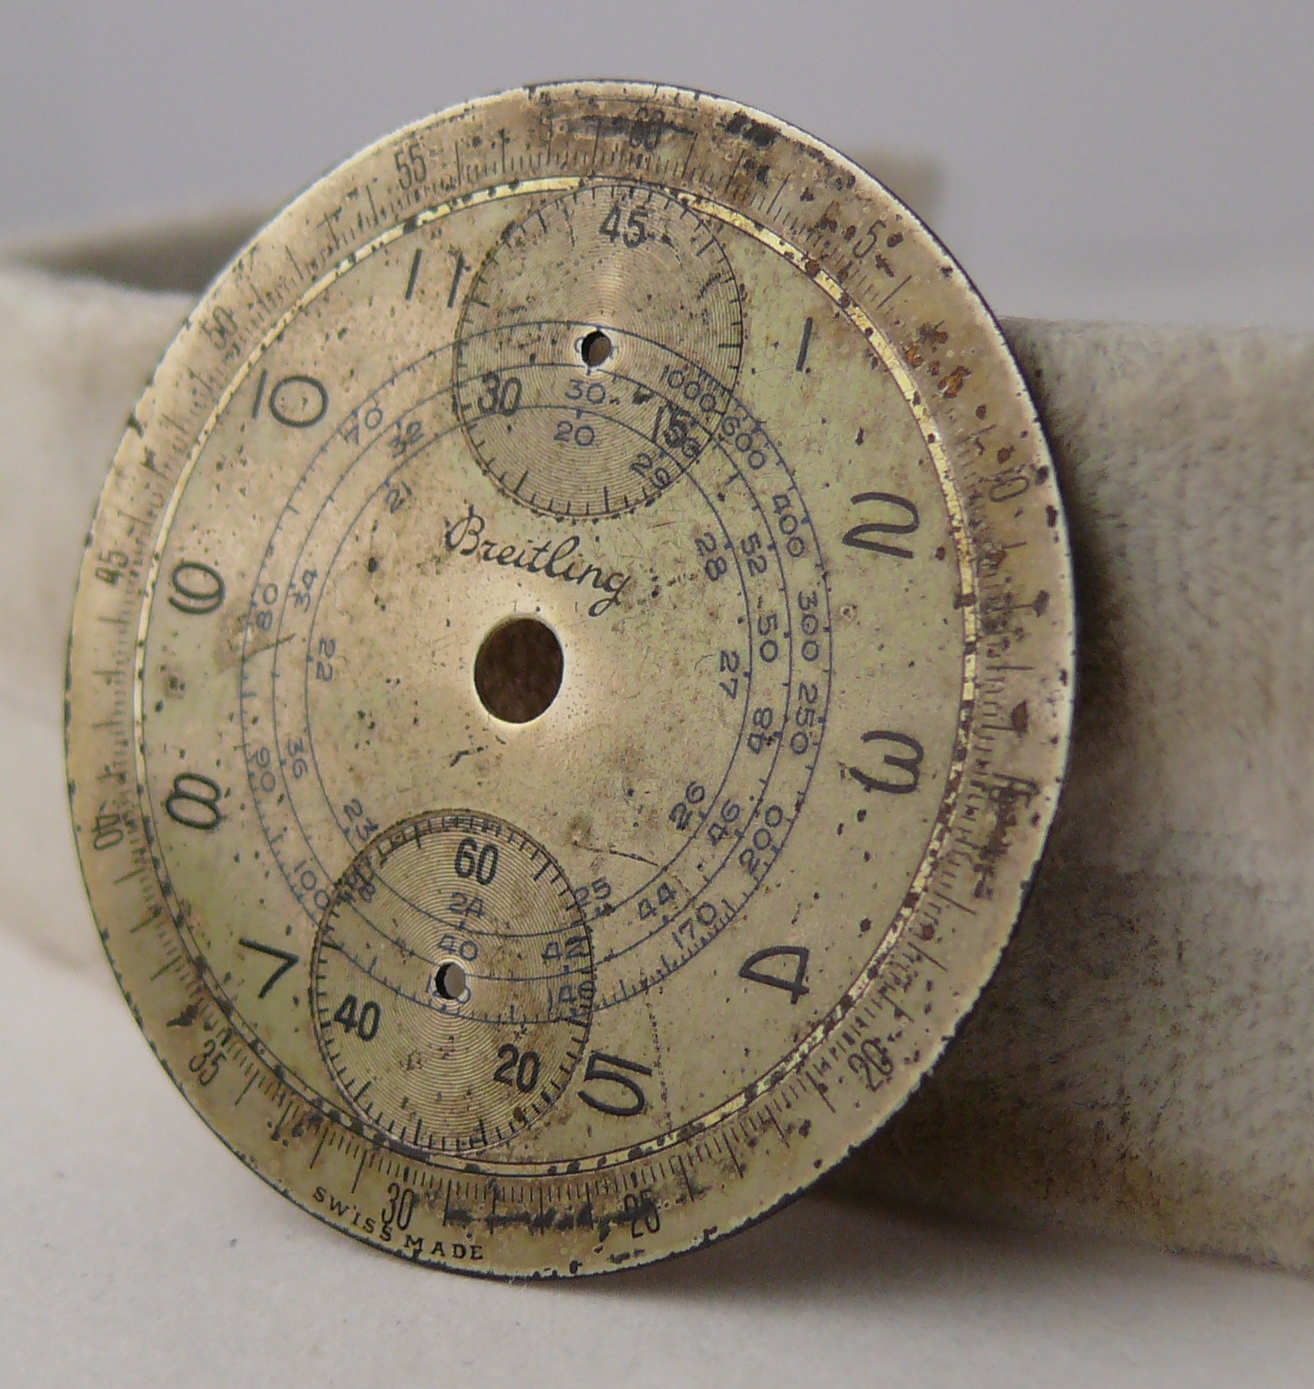 EARLY Vintage Breitling Up & Down Chronograph Dial. Suitable for parts projects or being restored.